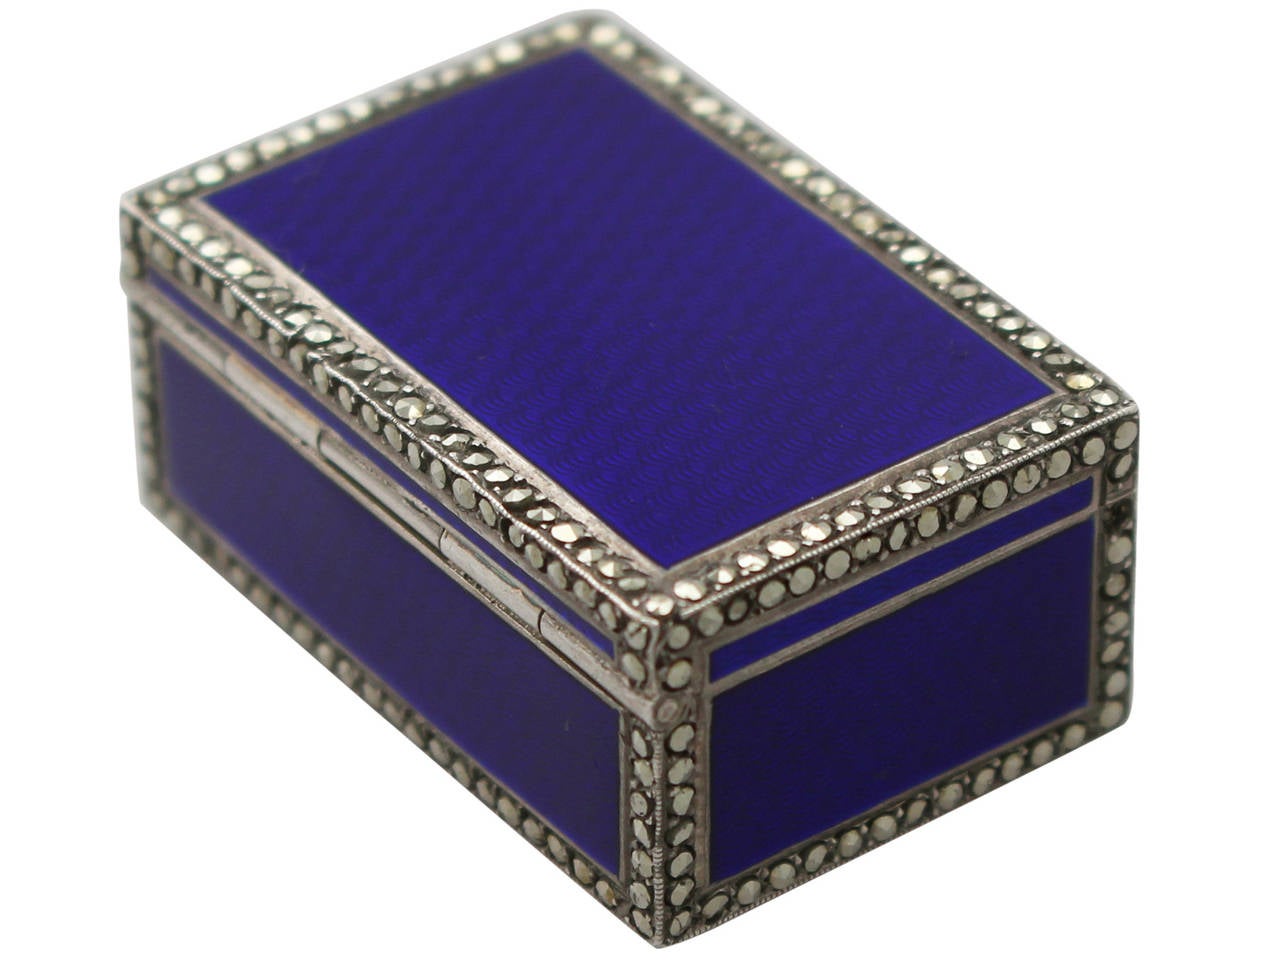 Early 20th Century 1900s Sterling Silver, Enamel and Marcasite Miniature Music Box